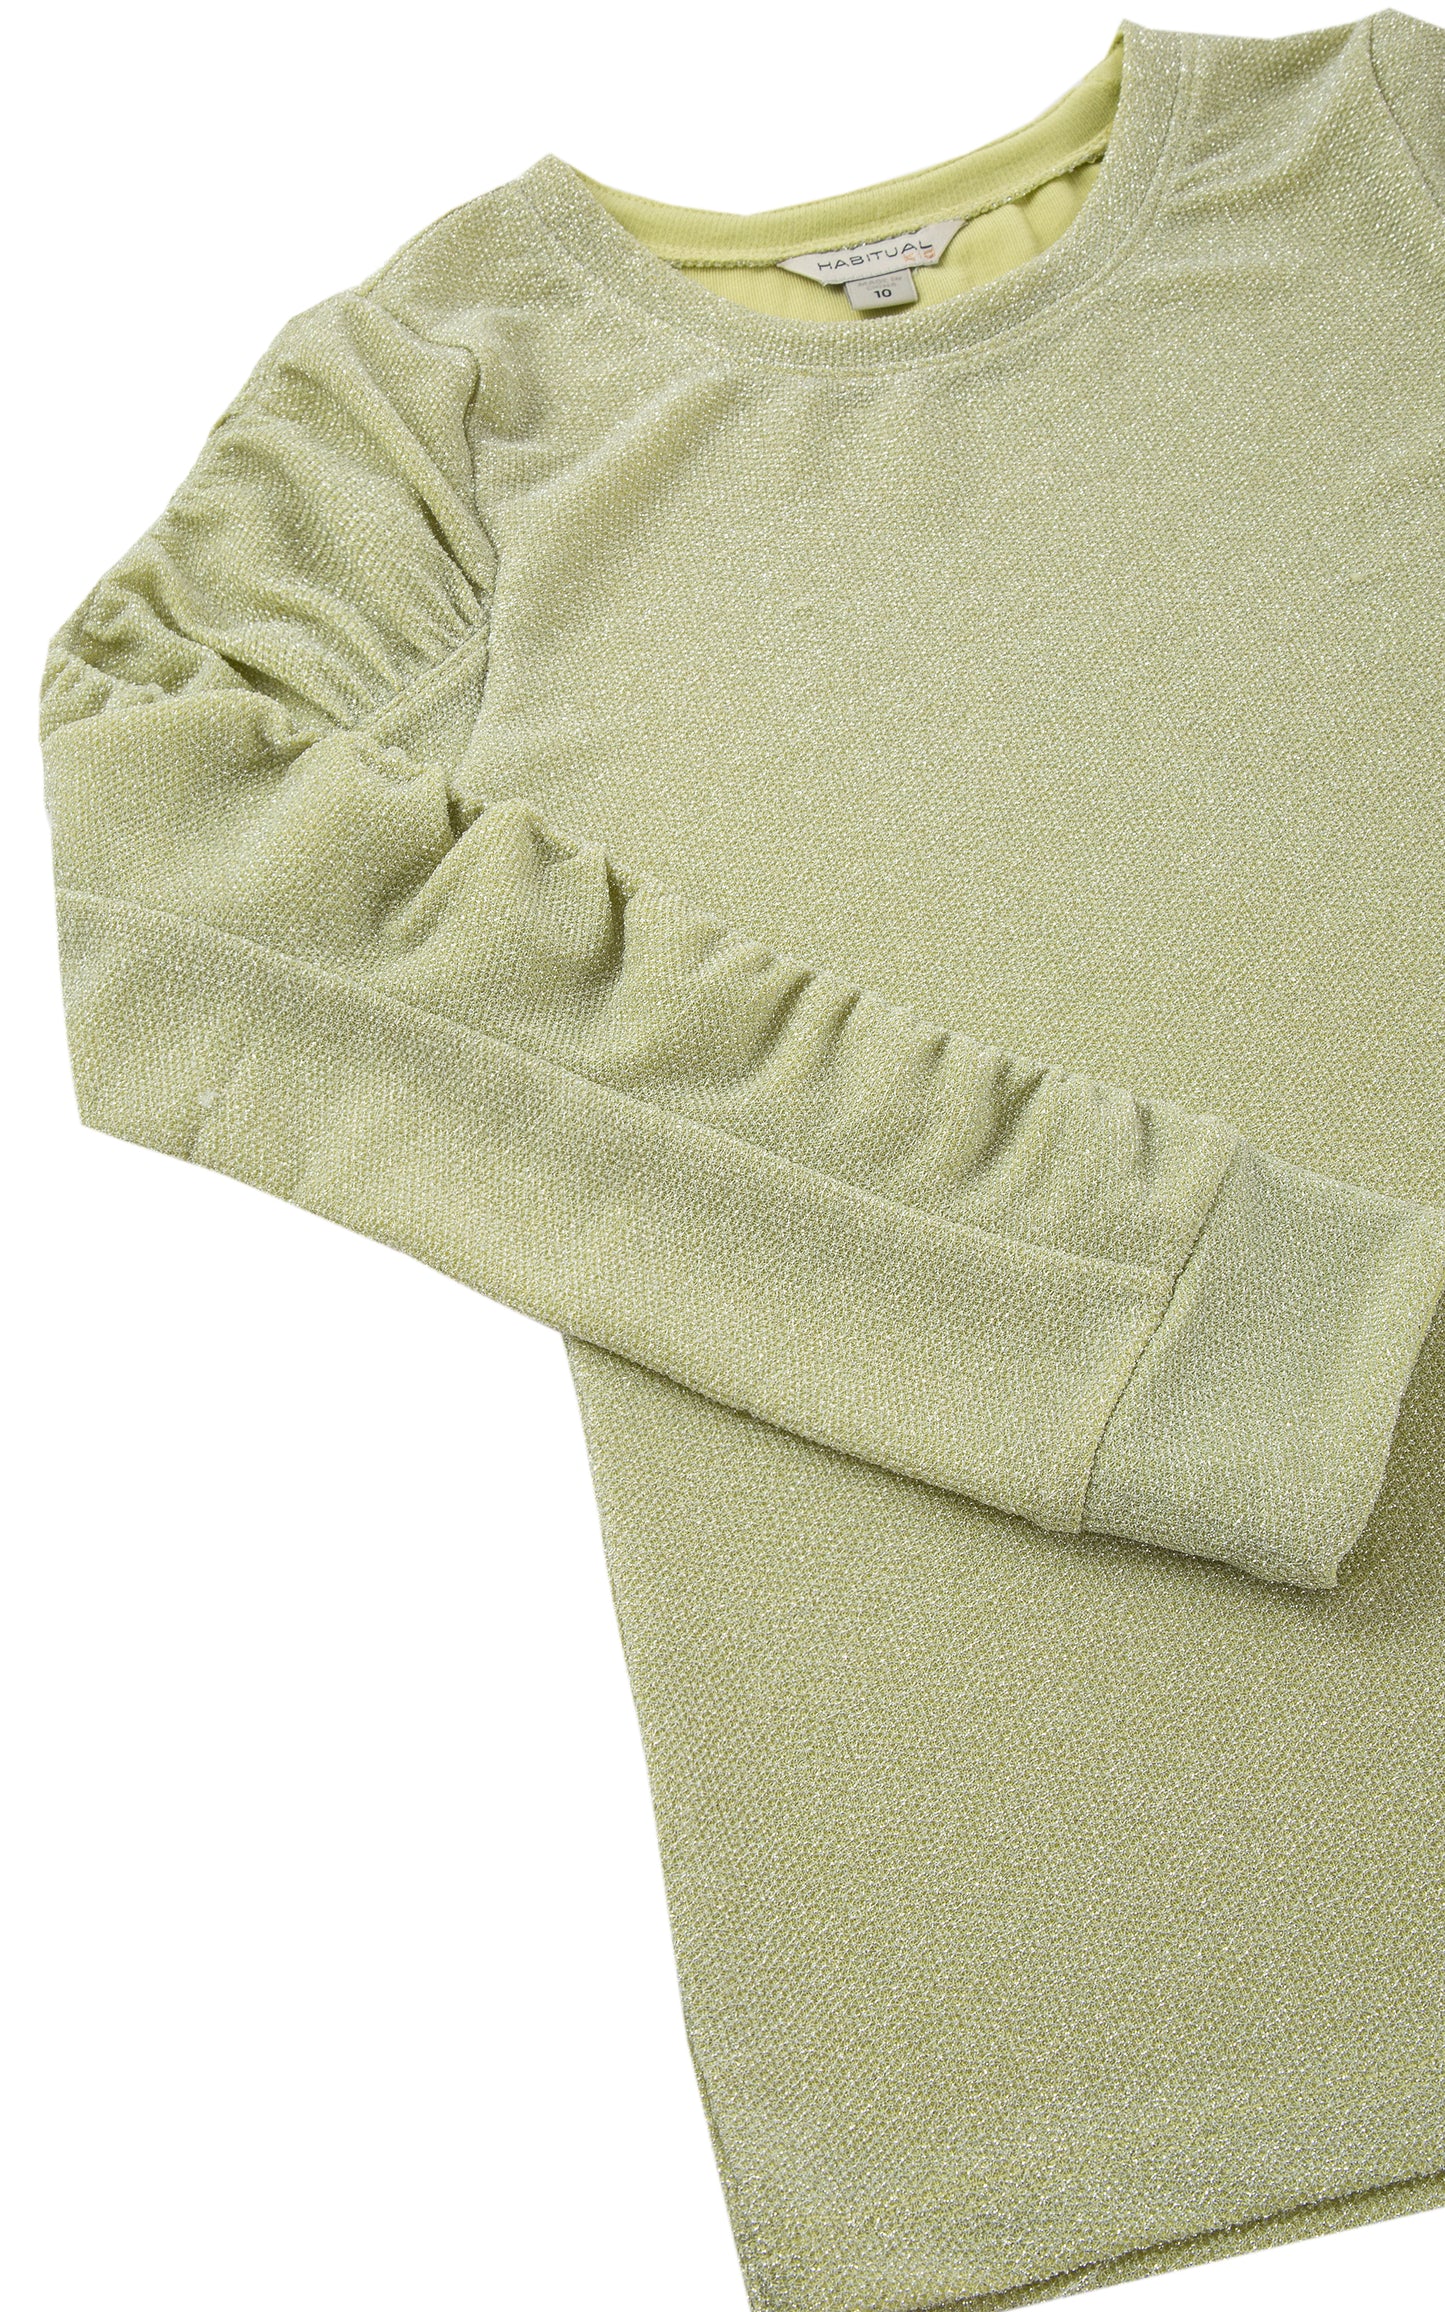 Close up of gathered, long sleeve of light green crewneck top with metallic accents.